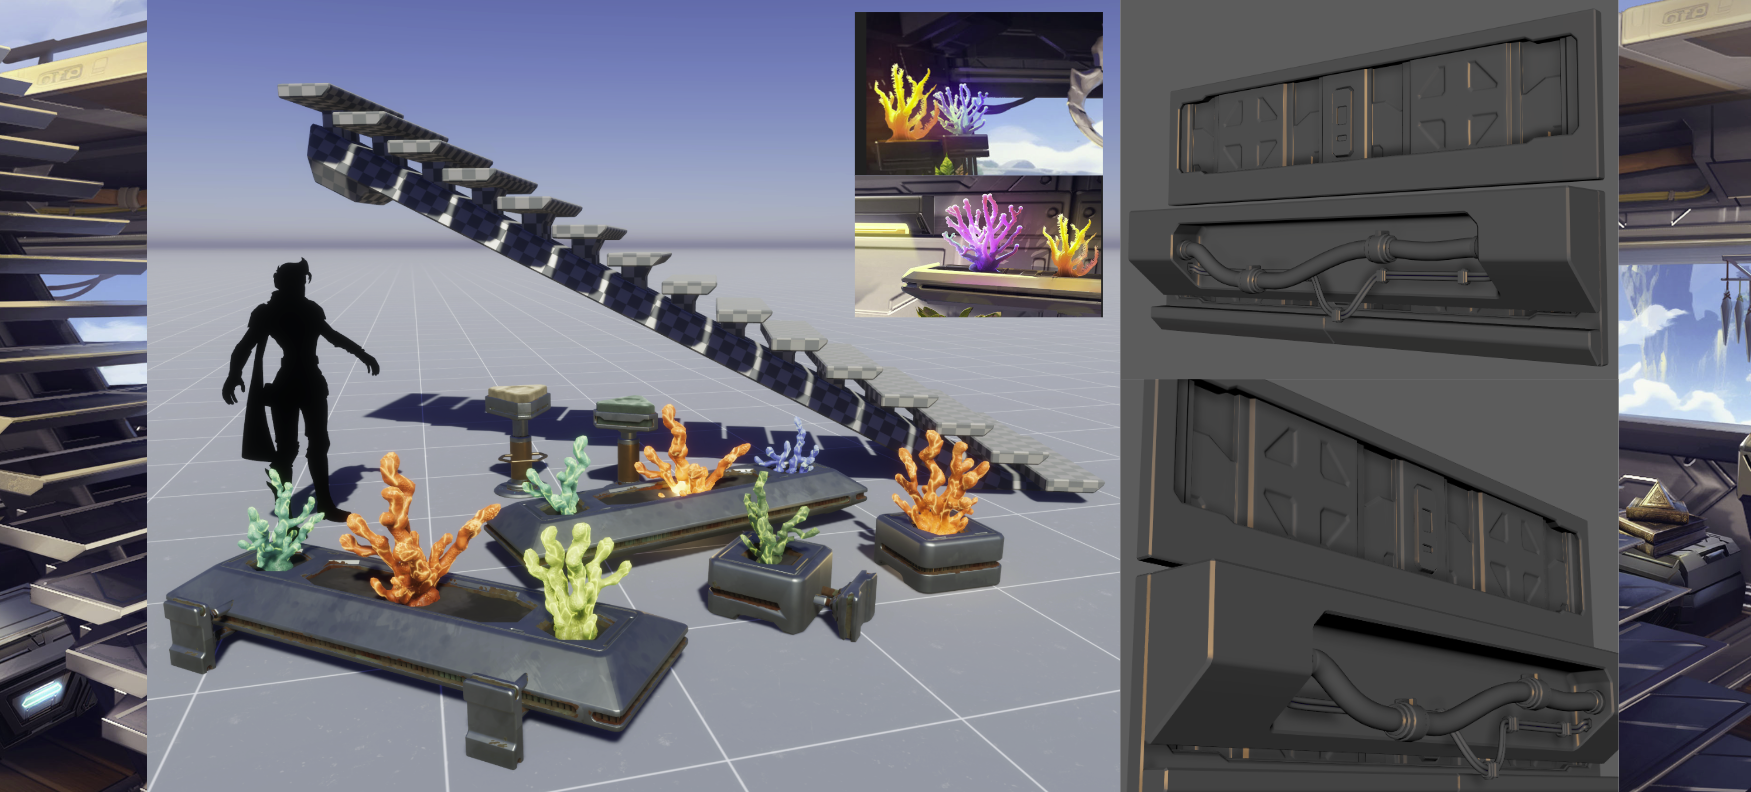 3D models for some of some cave plants, as well as greybox blockouts of stairs and some wall panels/piping.